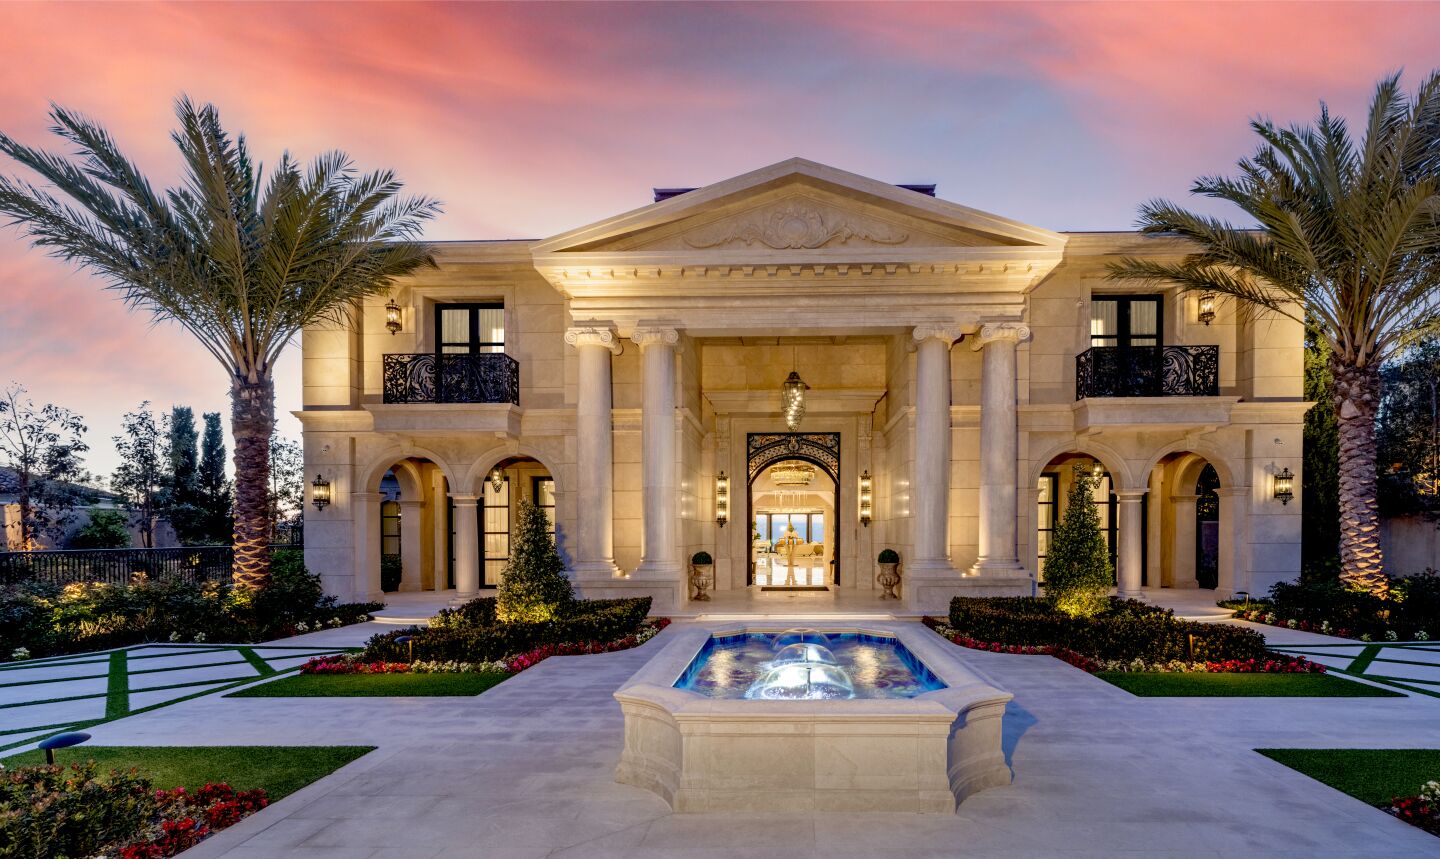 The 15,500-square-foot palace.